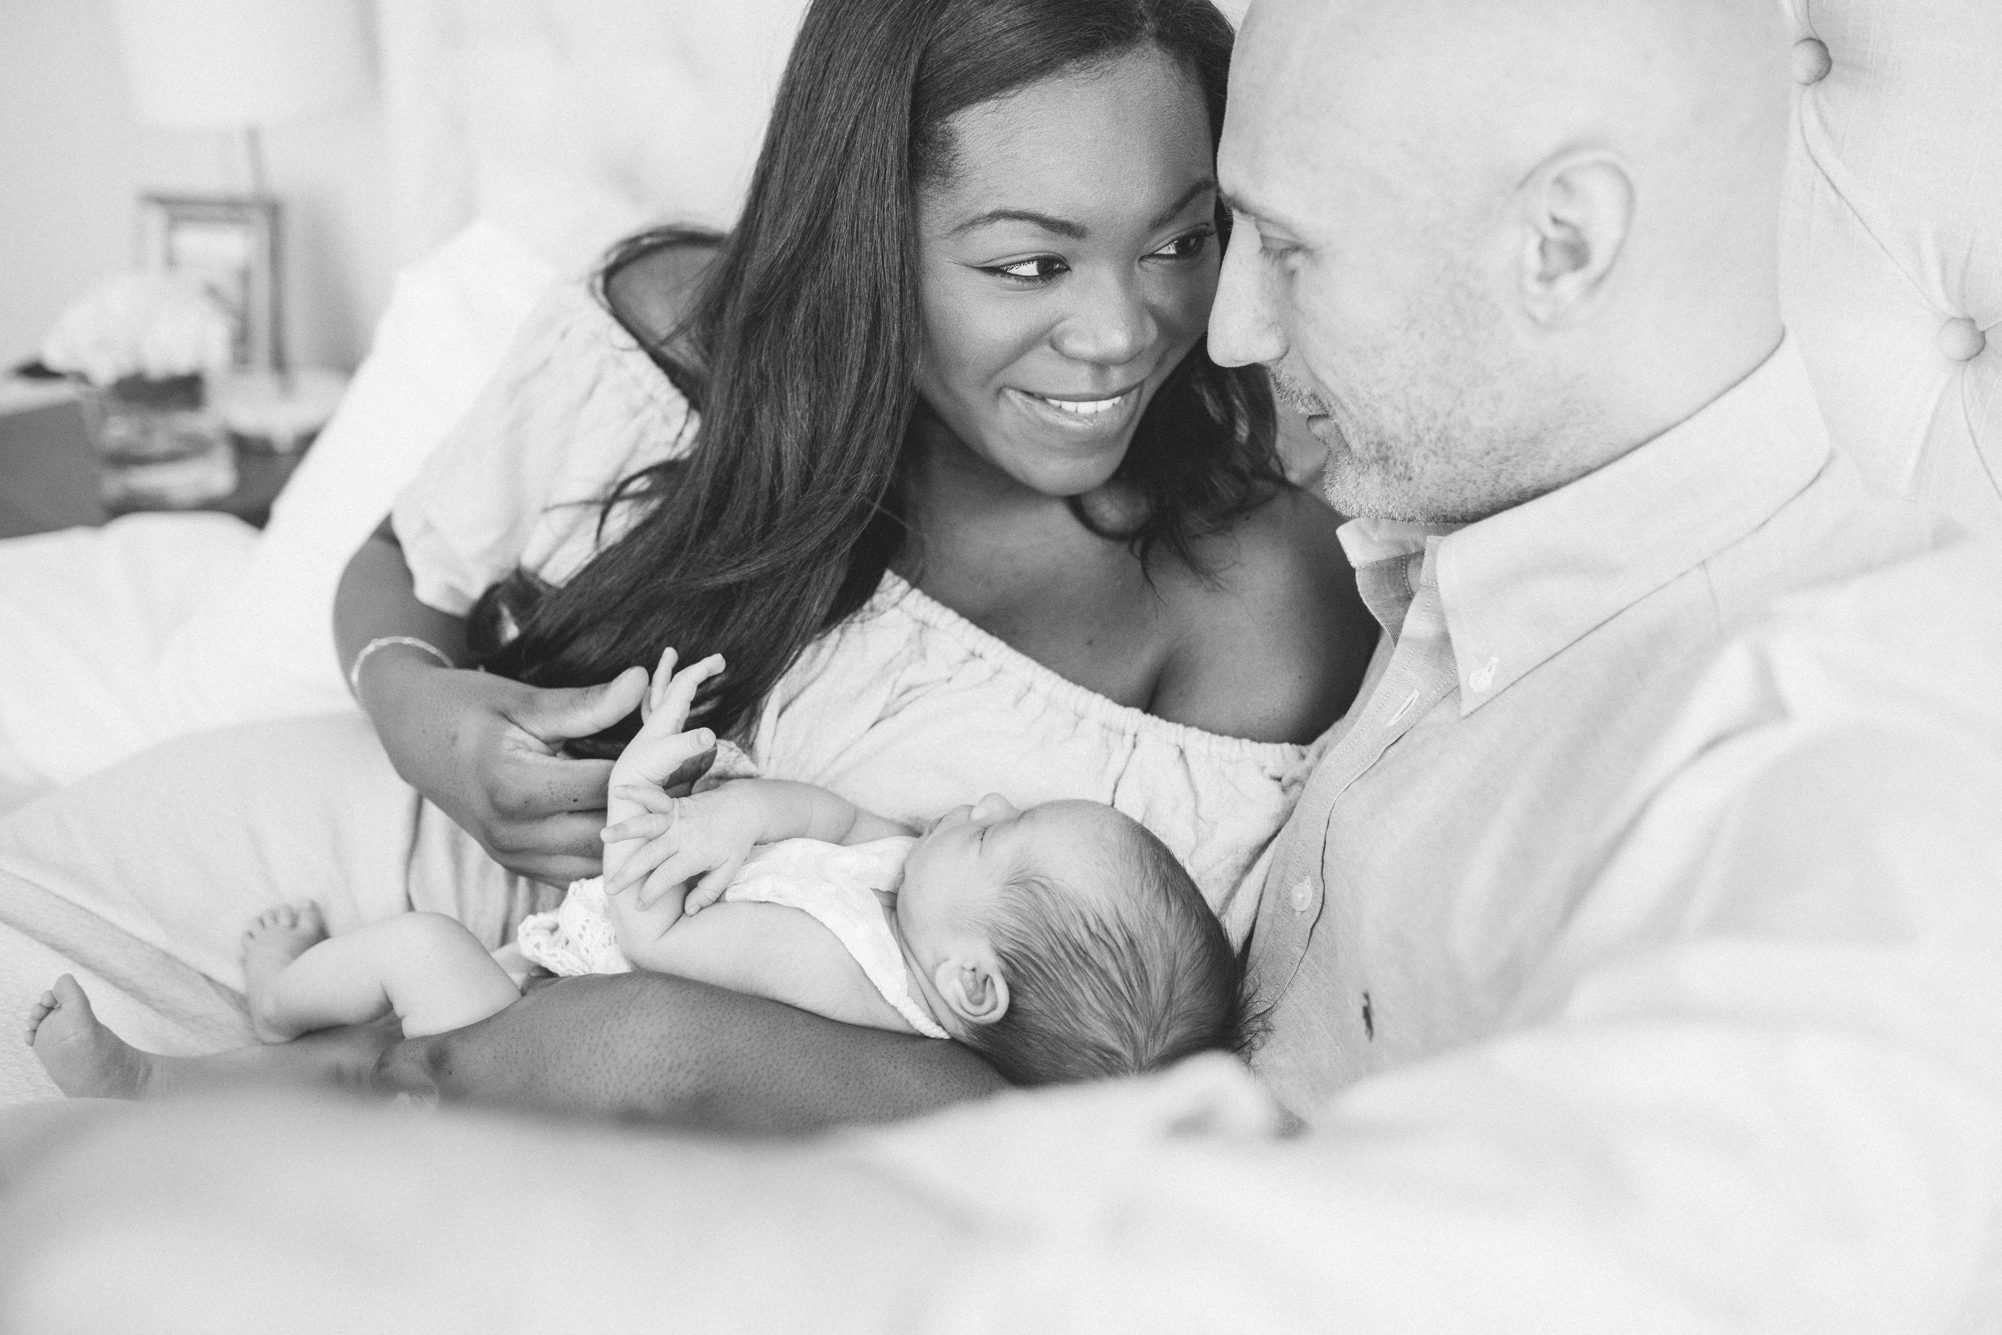 Black and white image of parents holding baby on bed during newborn session. Photo by LRG Portraits.